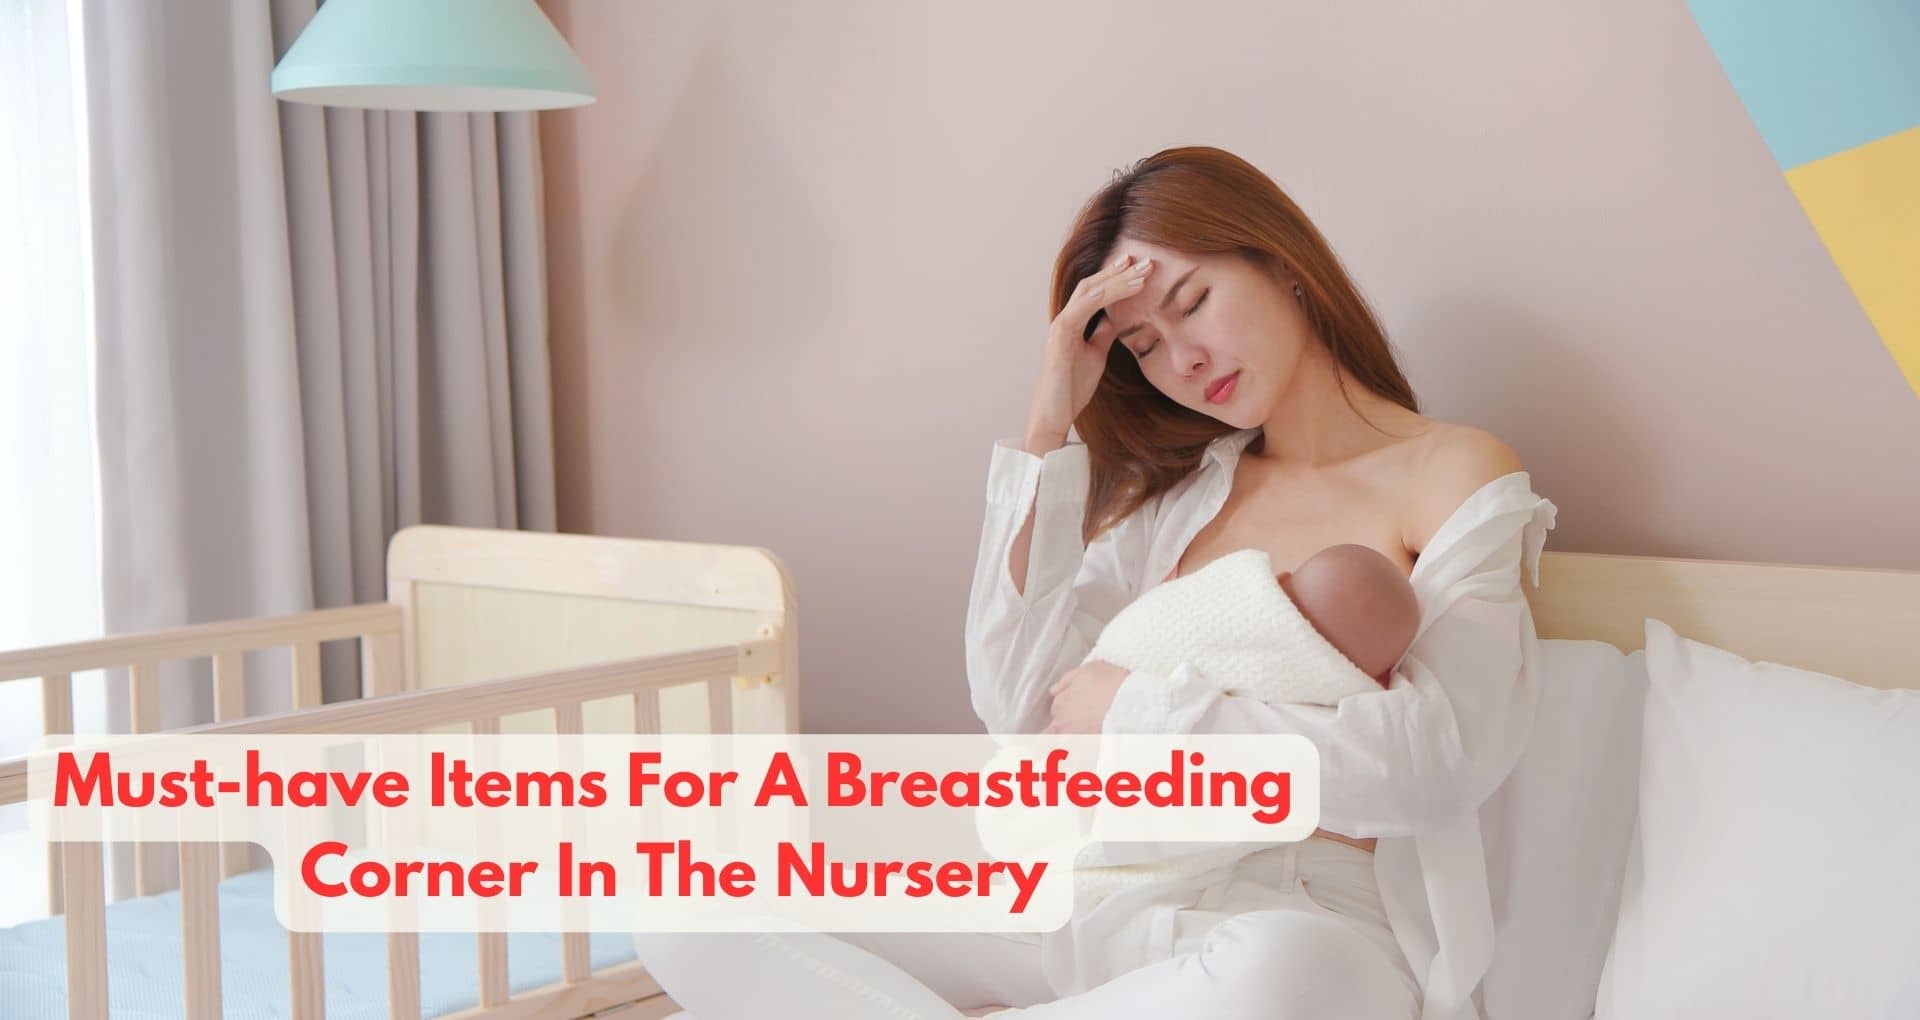 What Are The Must-have Items For A Breastfeeding Corner In The Nursery?